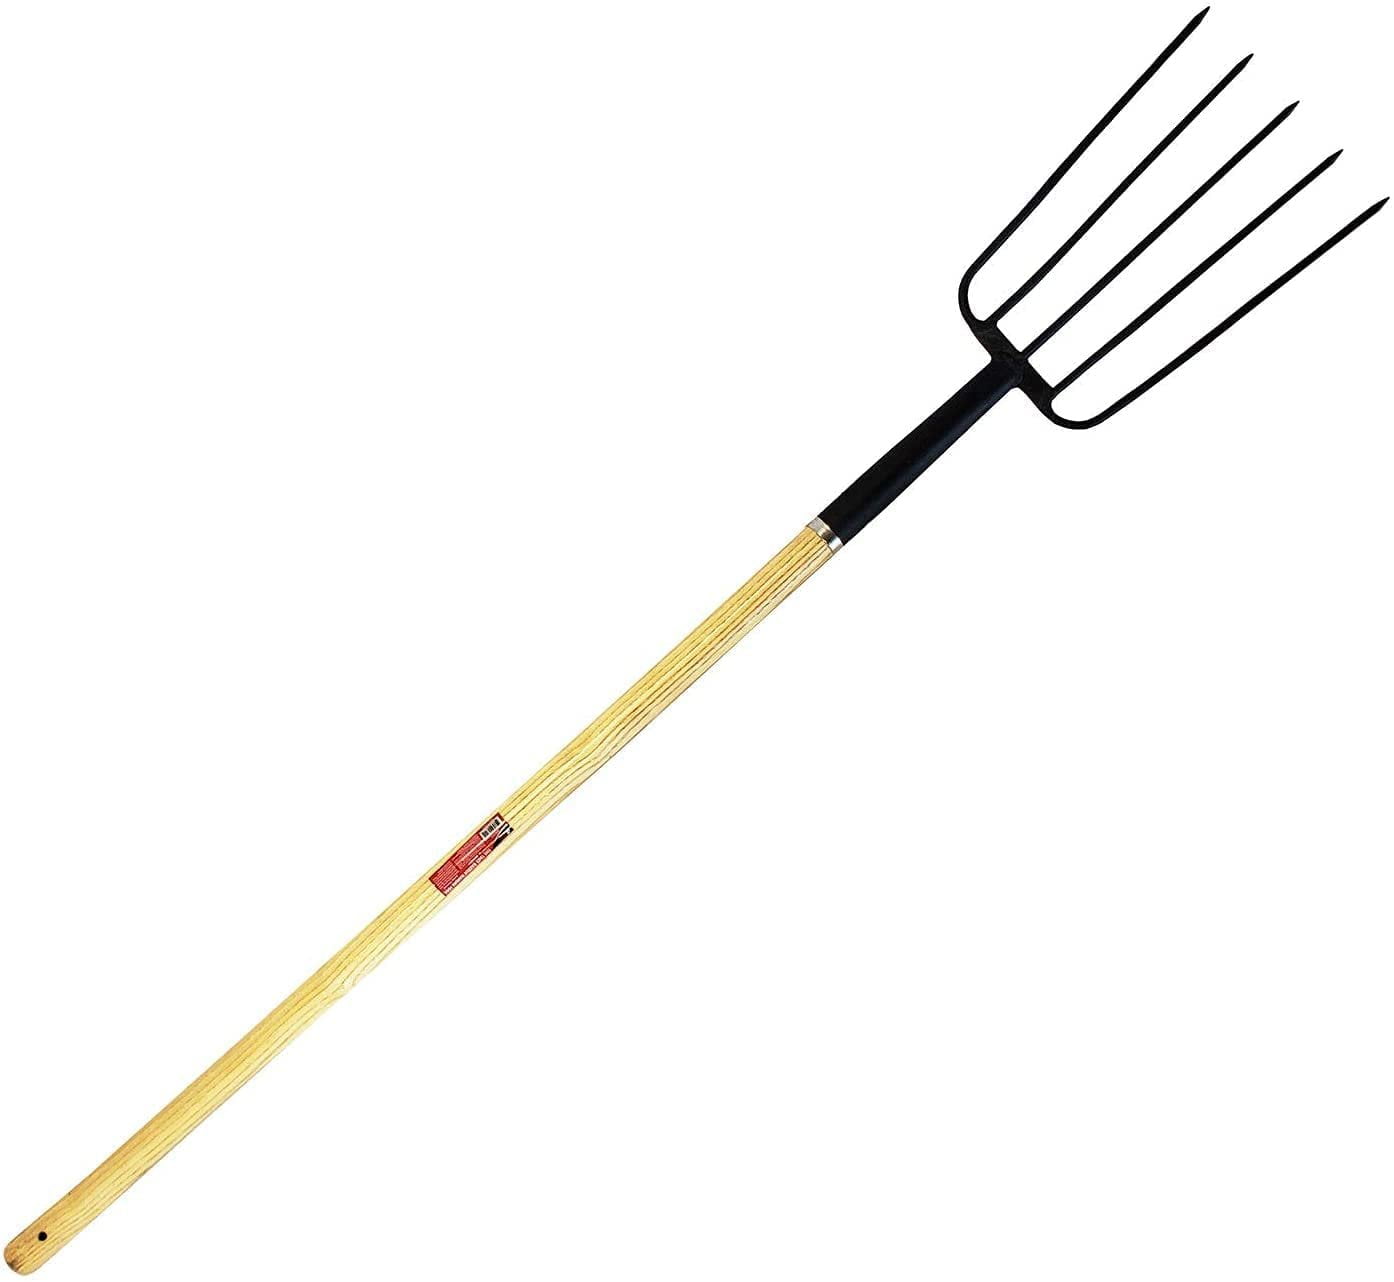 Steel Inc 2826400 Ames 4 Tine Forged Spading Fork-2826400 4 Tine The AMES Companies